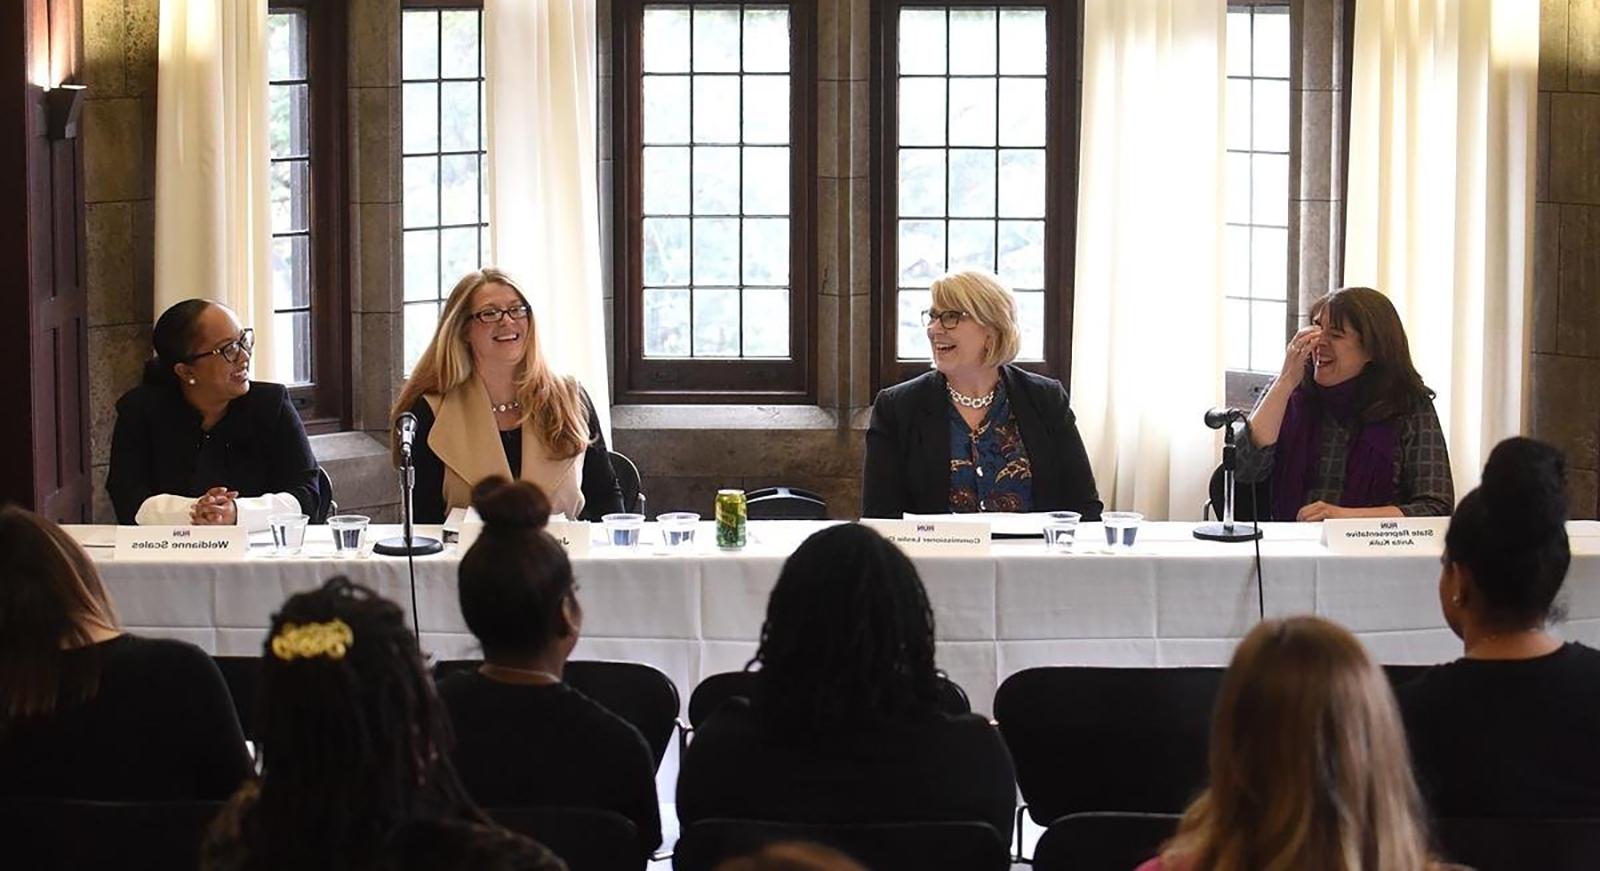 A panel of smiling and laughing women are seated at a PCWP event